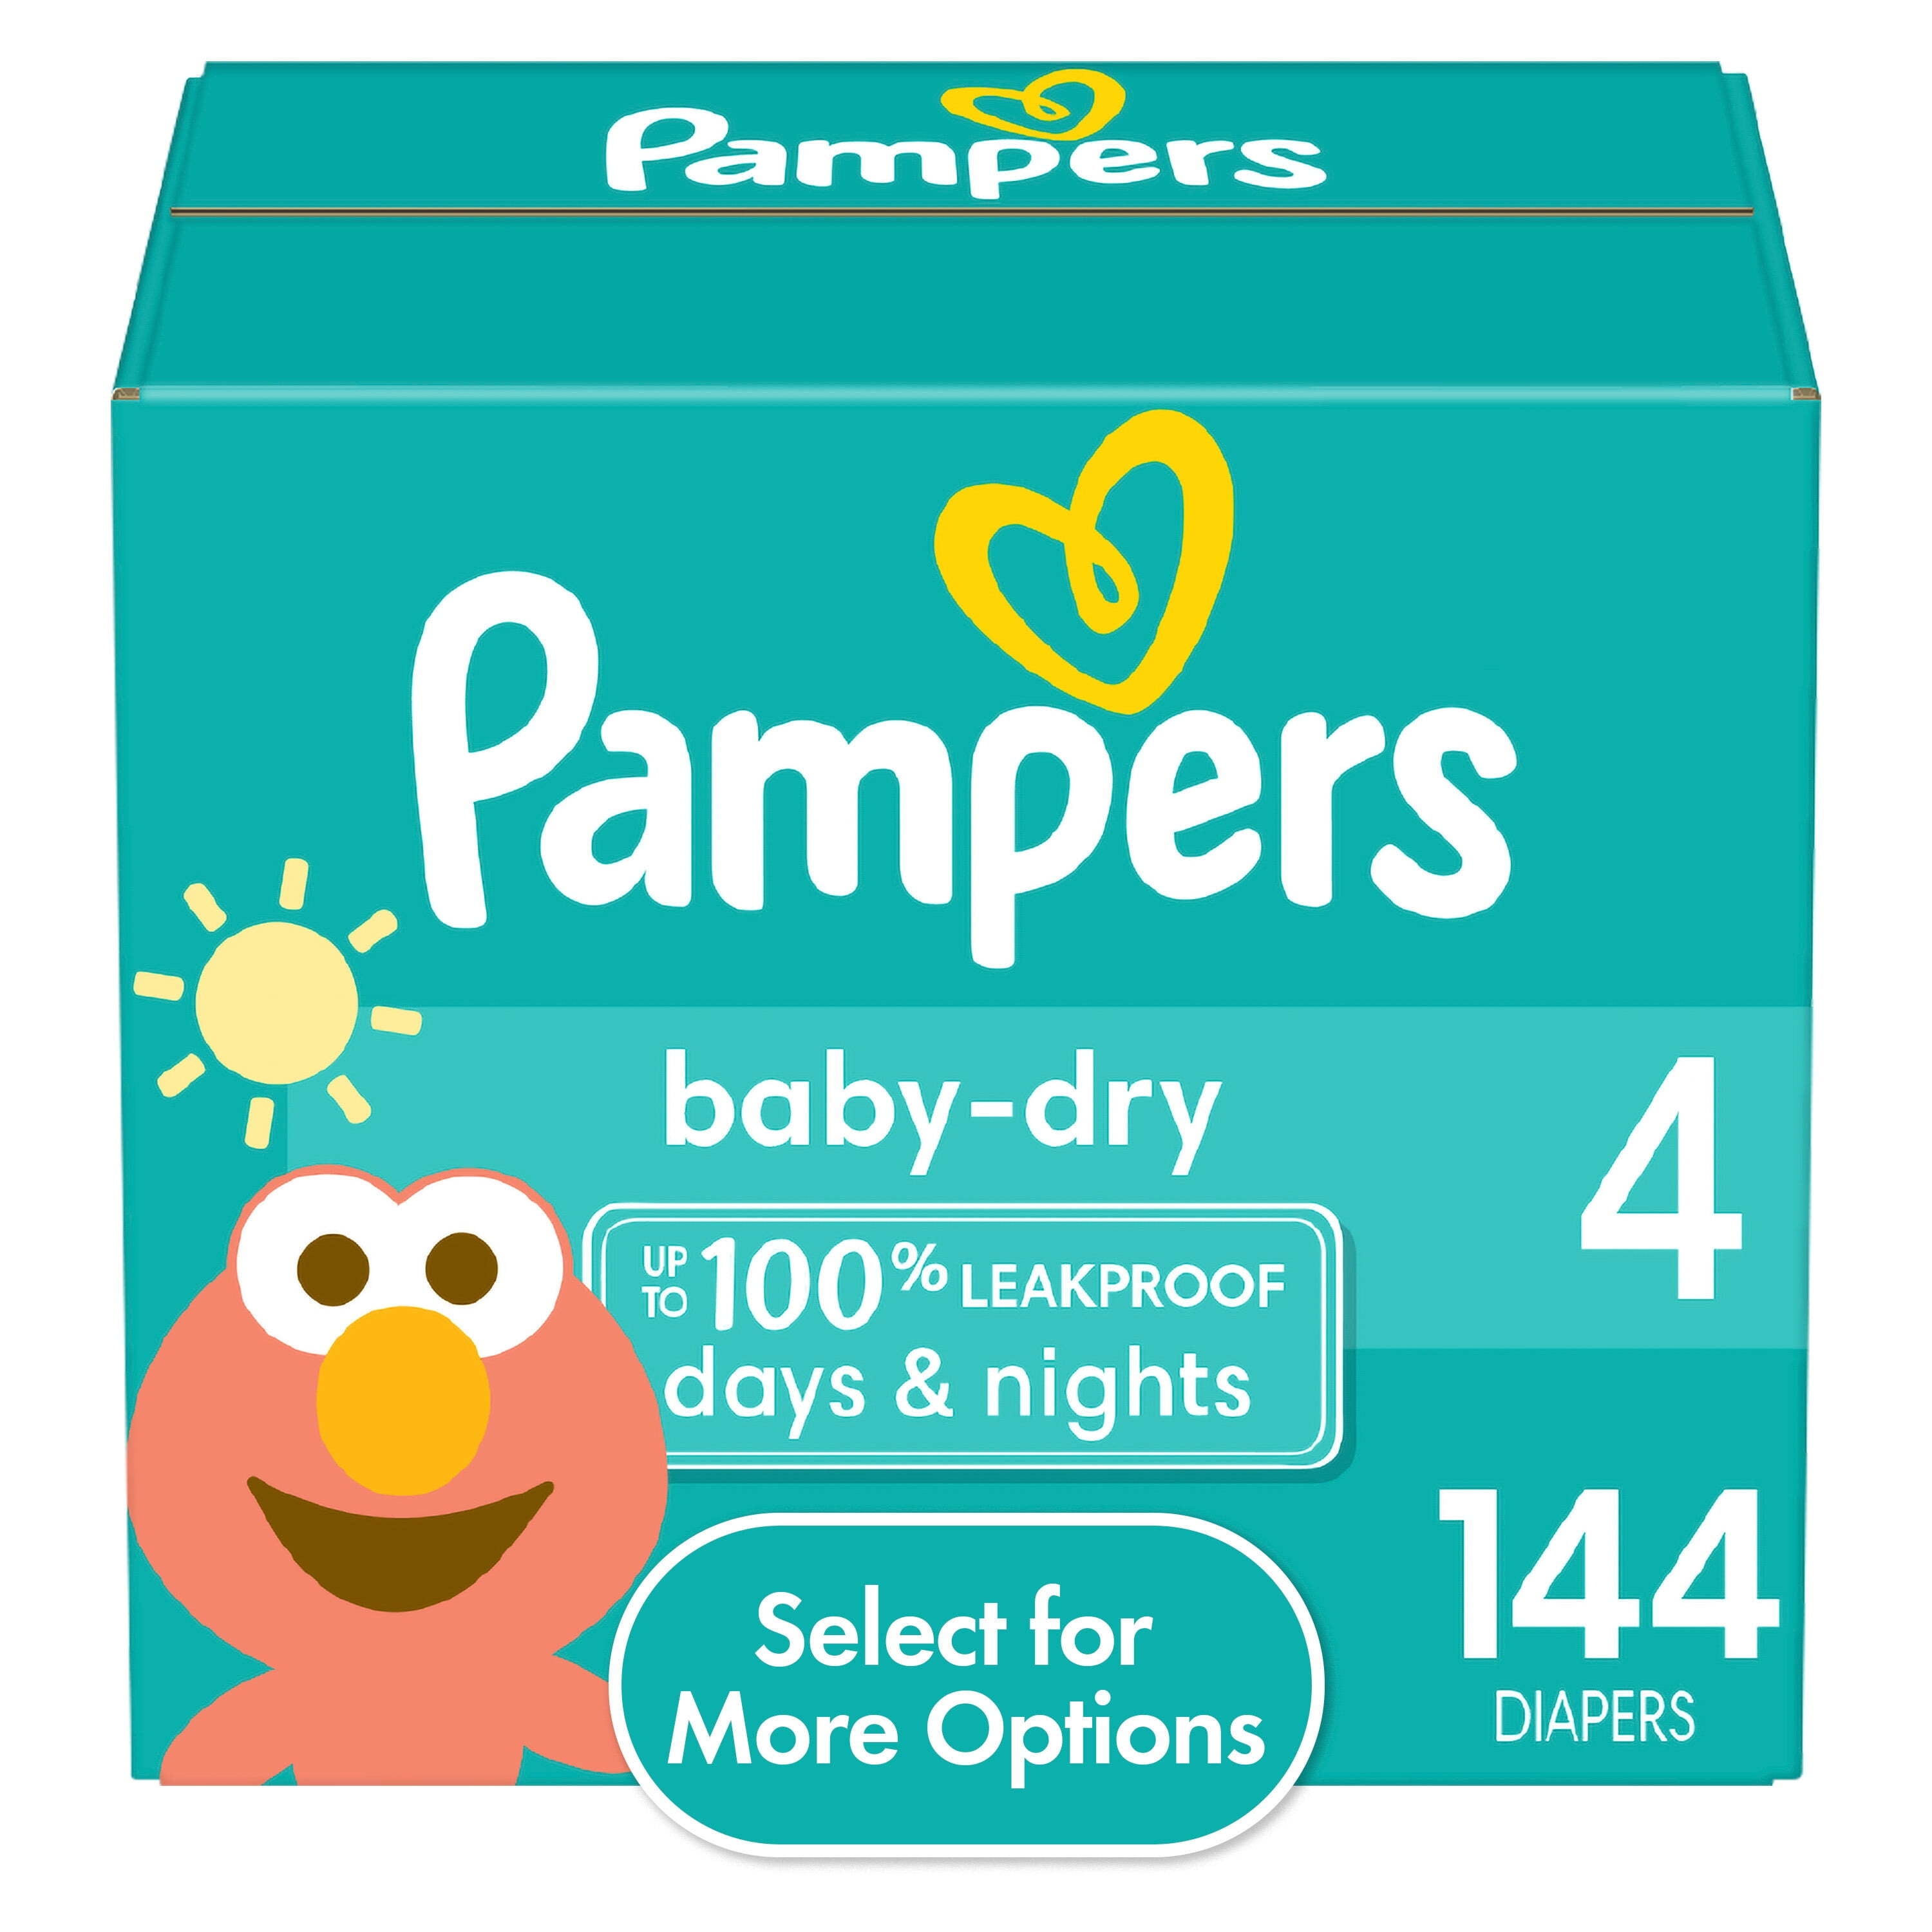 Pampers Harmony size 4 diapers (from 9 kg to 14 kg) Order Online